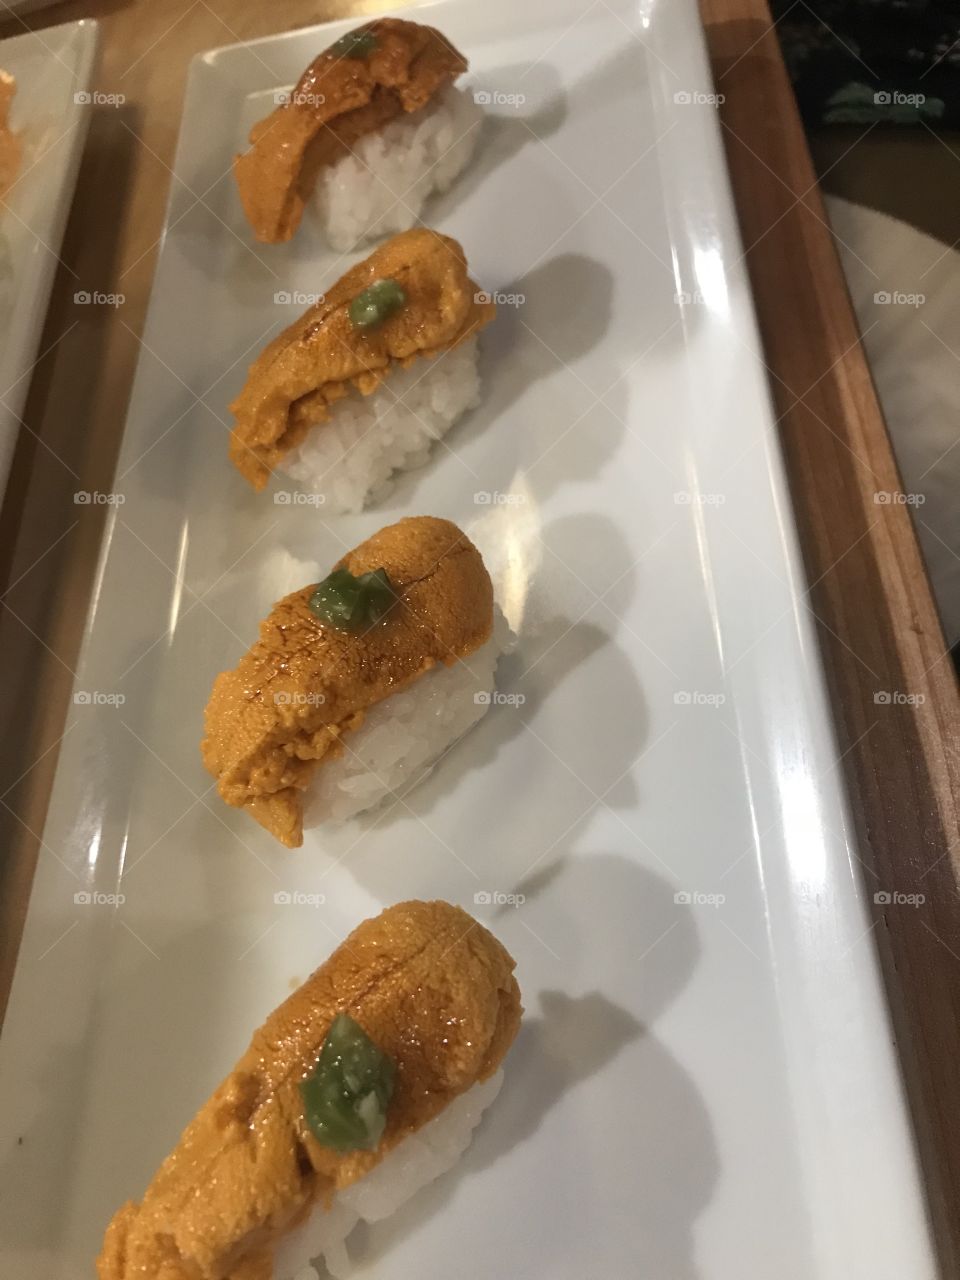 Uni sushi in Beverly Hills